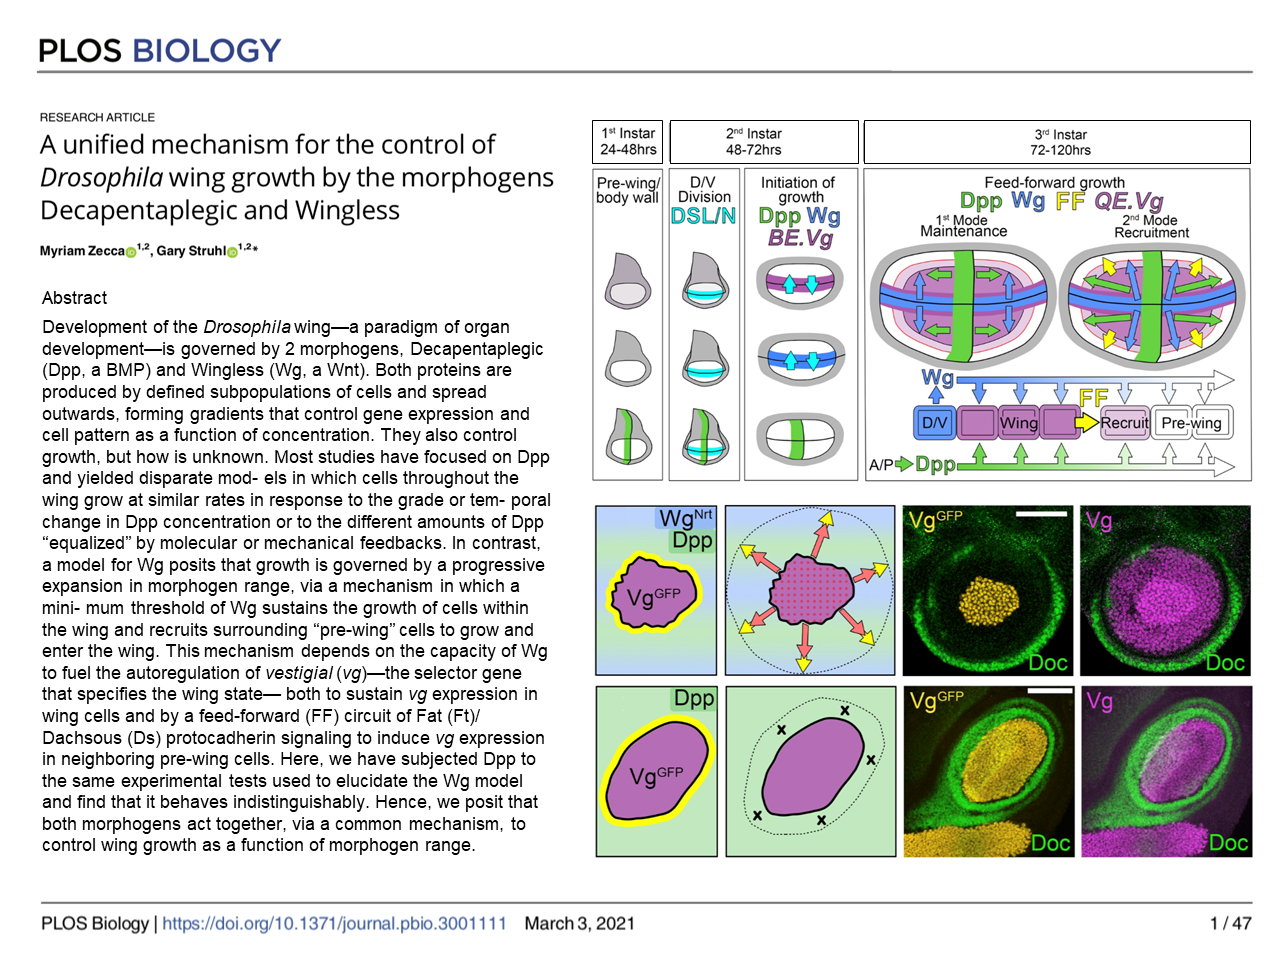 Plos BiologyA unified mechanism for the control of Drosphia wing growth by the morphogens Decapentaplegic and Wingless